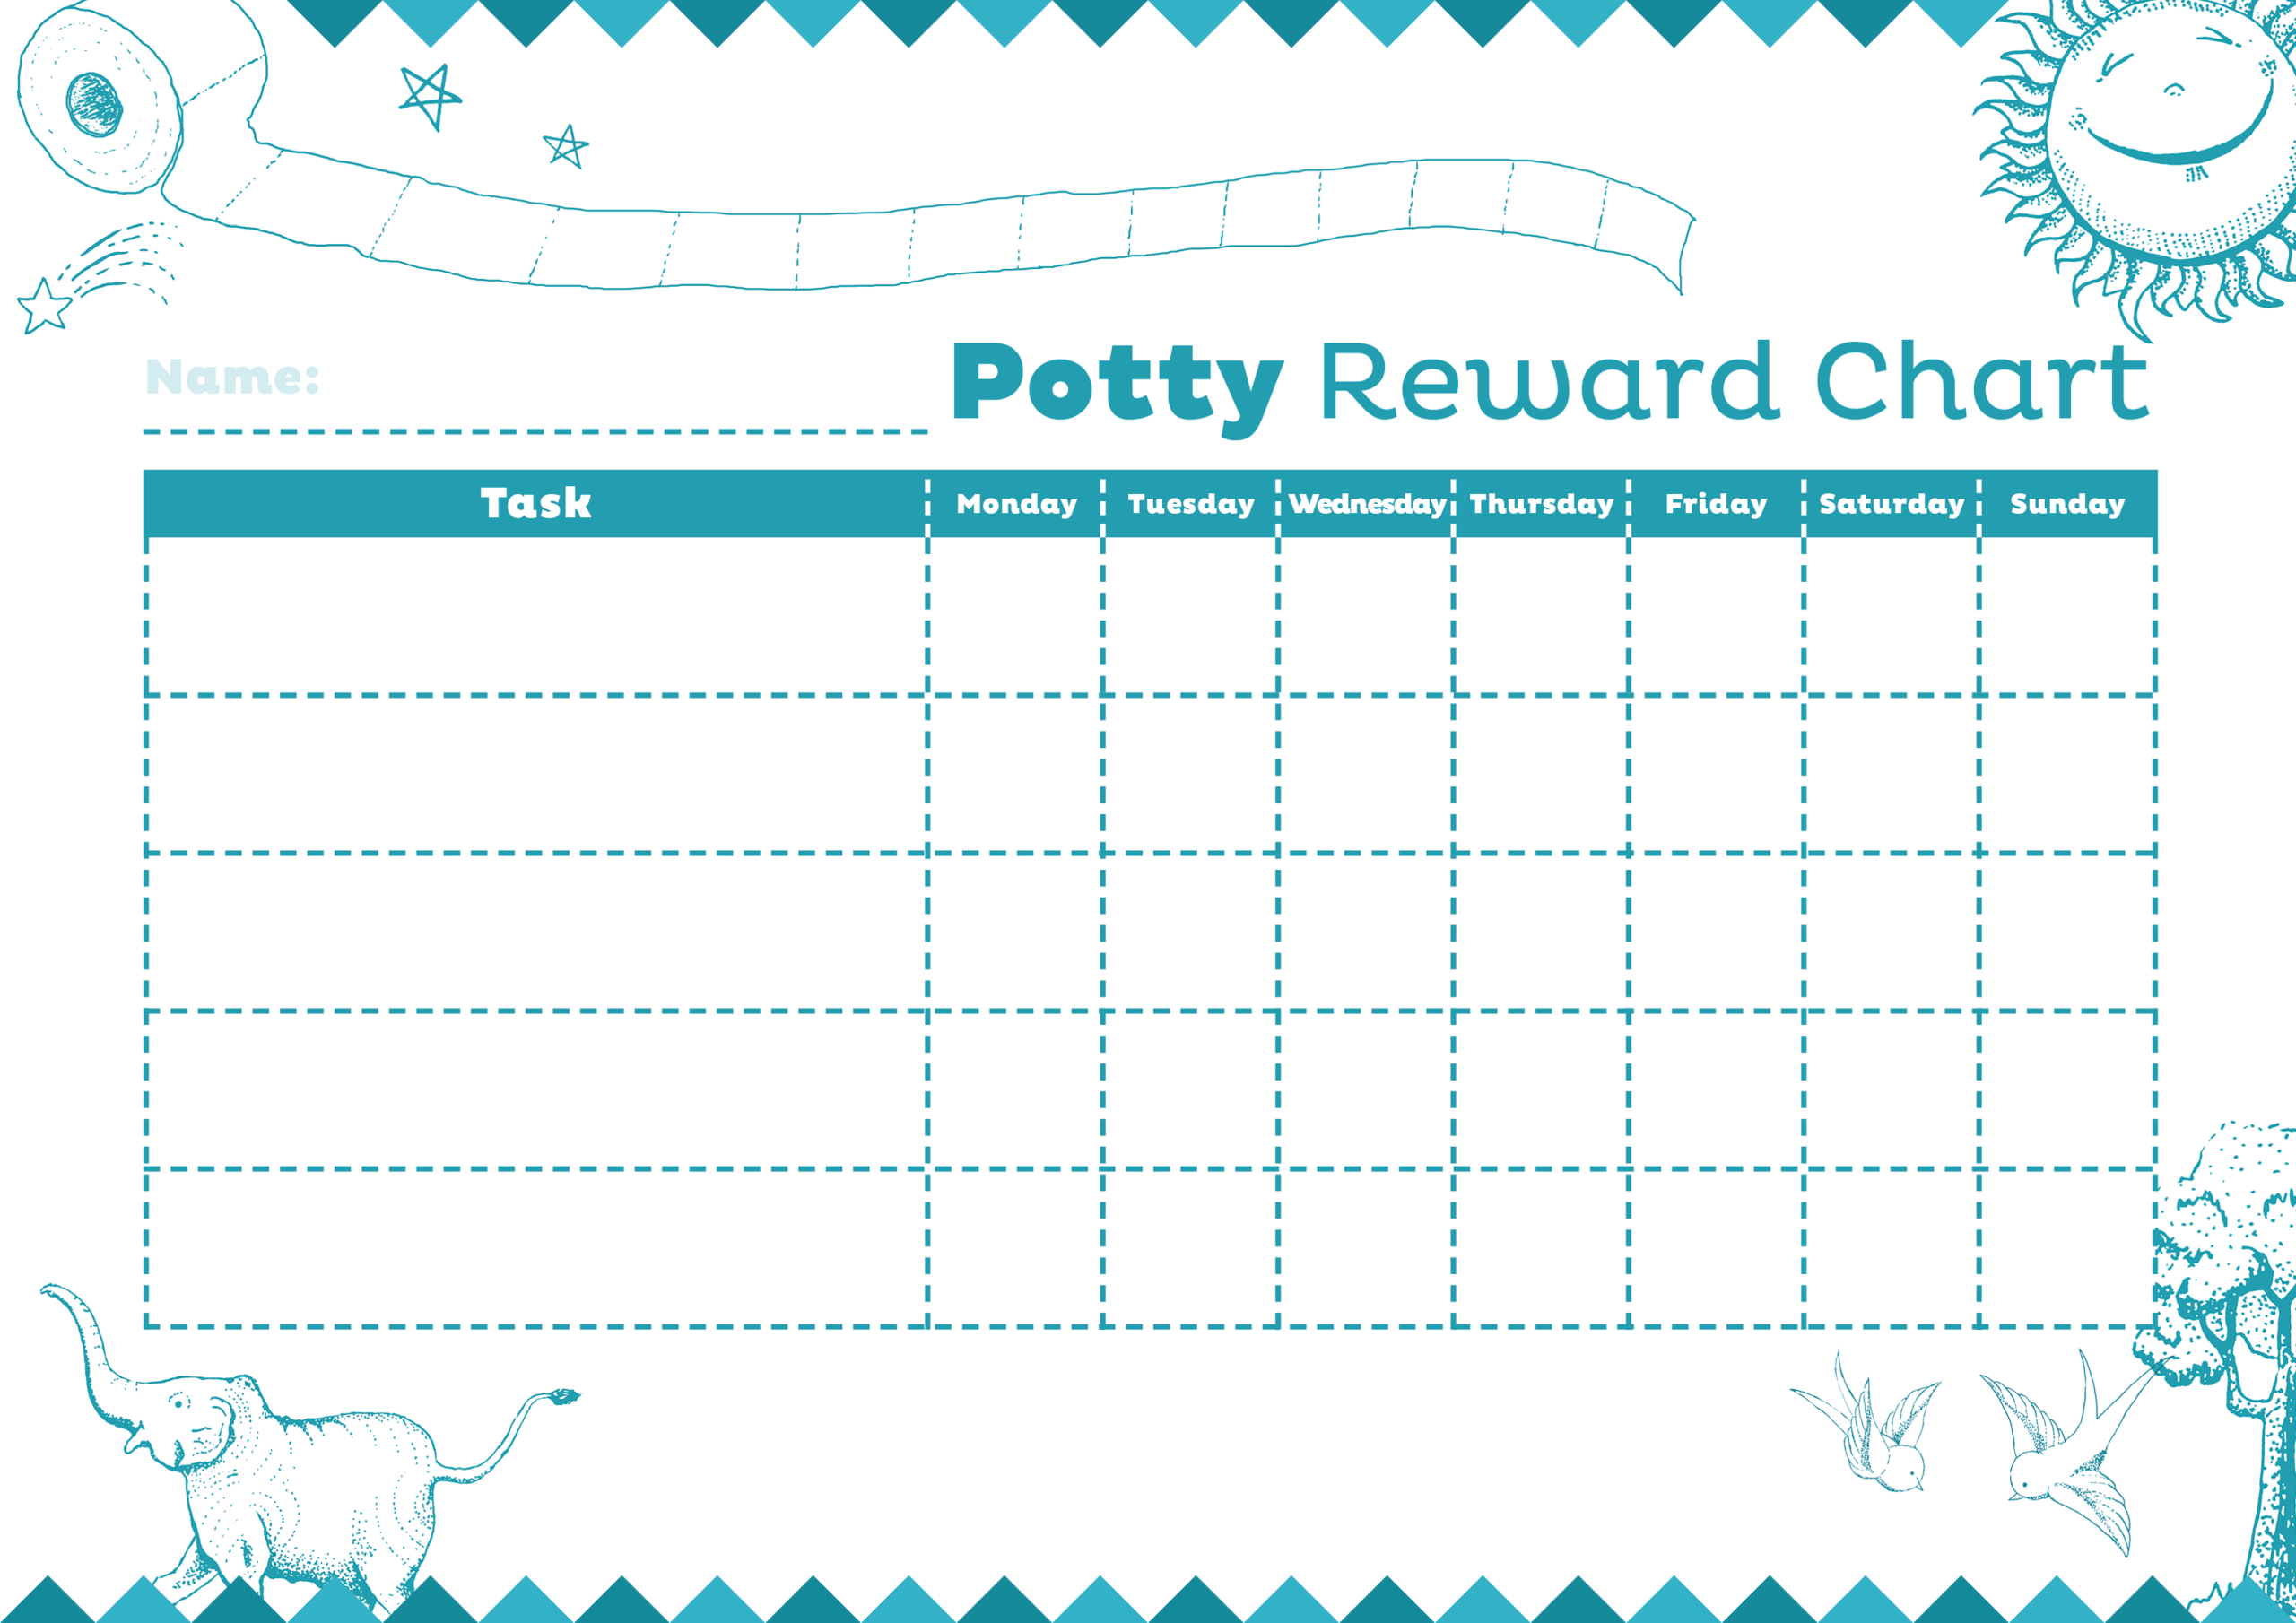 Potty Reward Charts Template | Activity Shelter In Blank Reward Chart Template